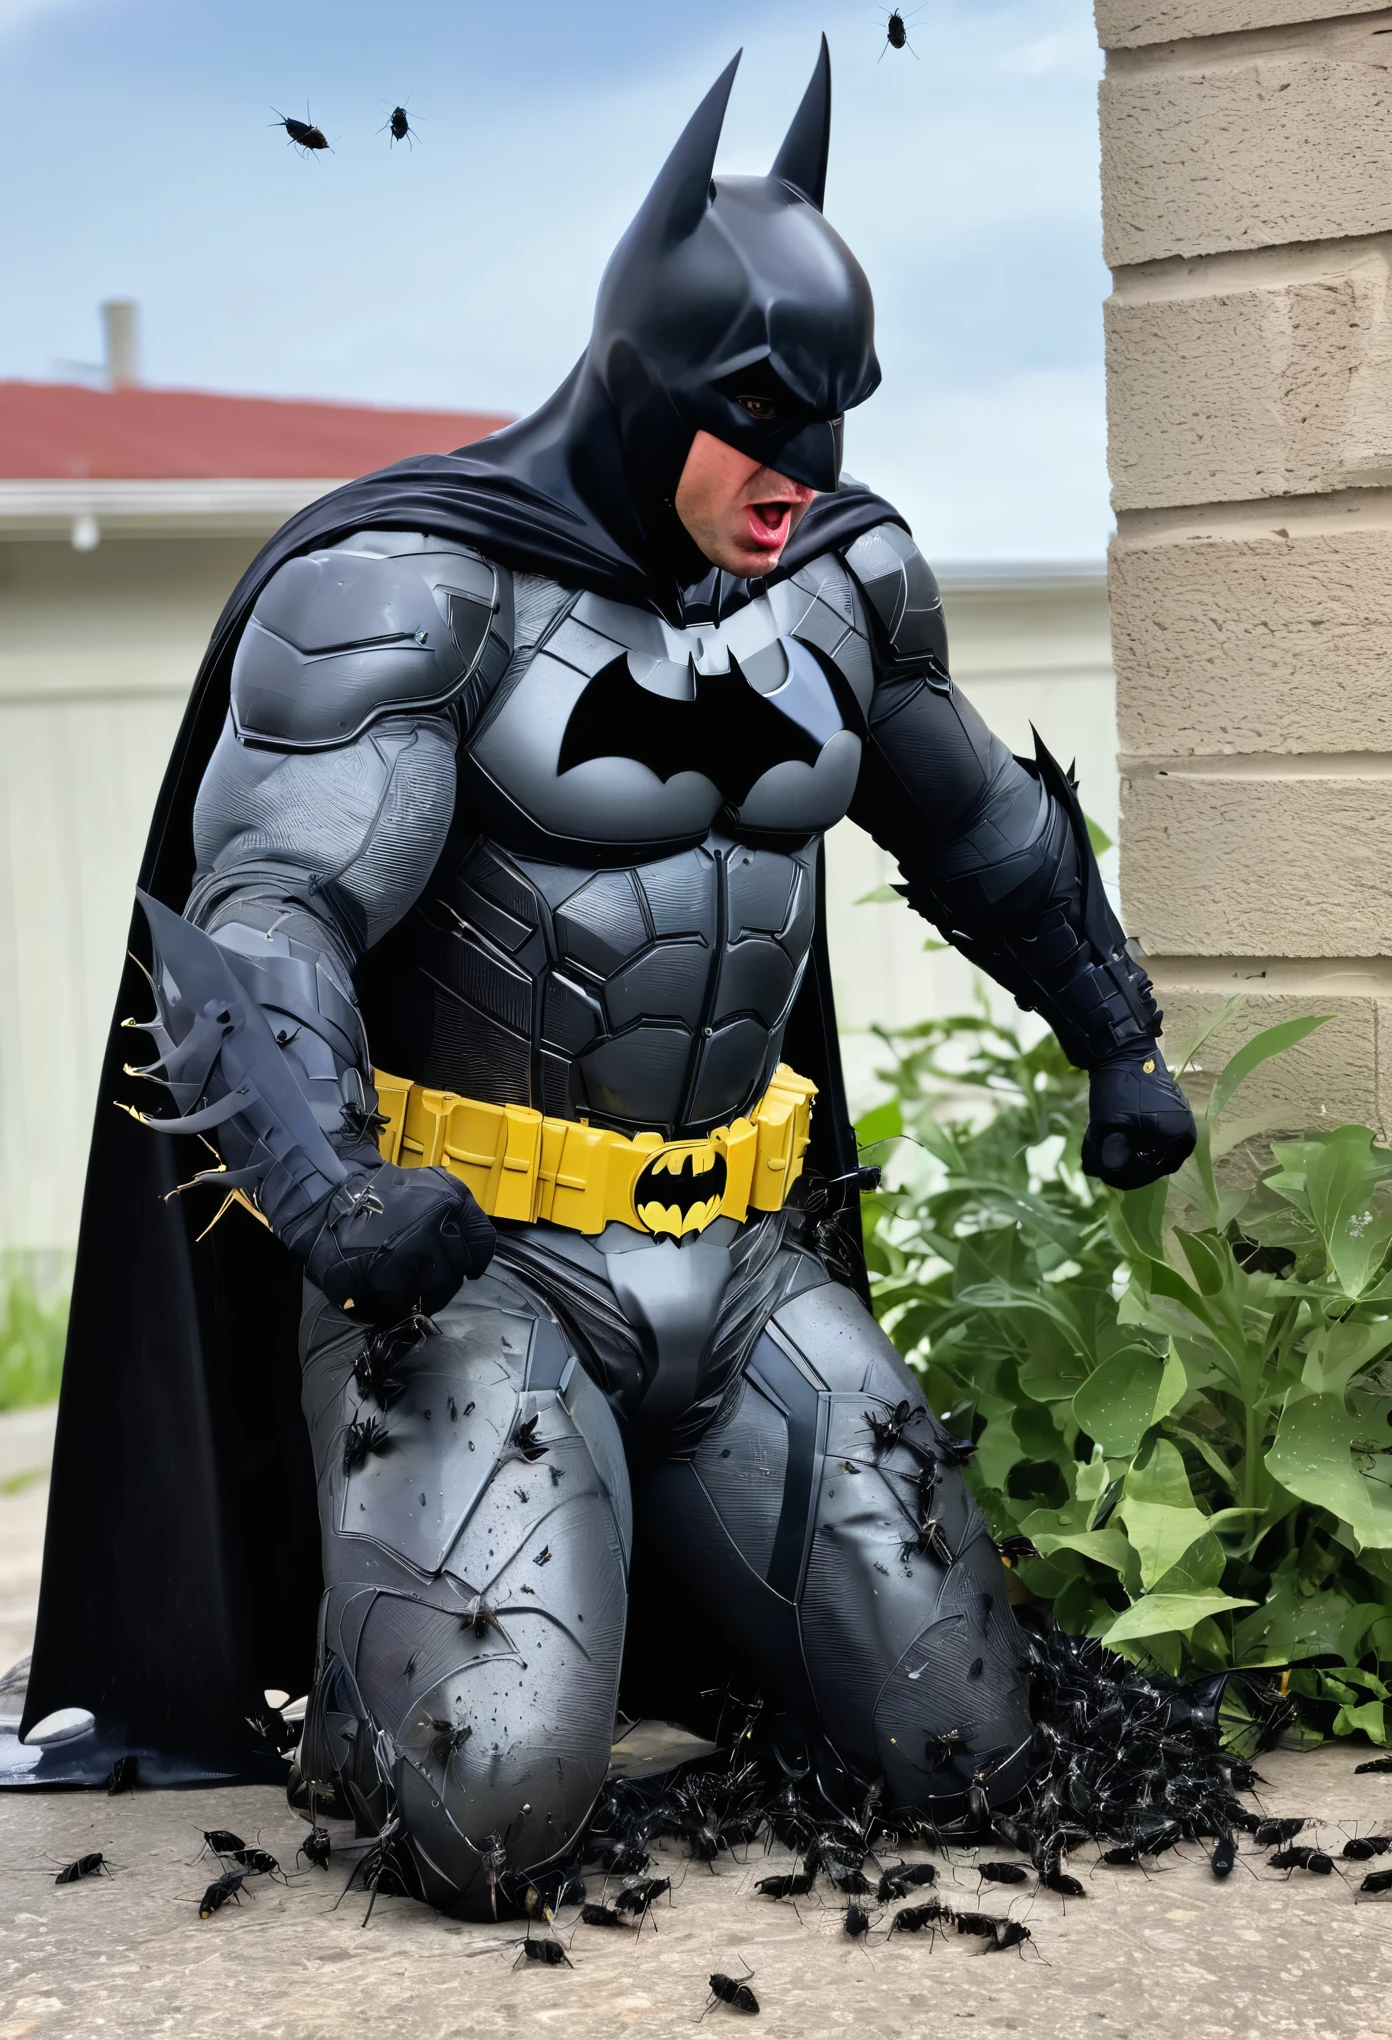 Batman got eaten by flies. He had to fight back with anything.